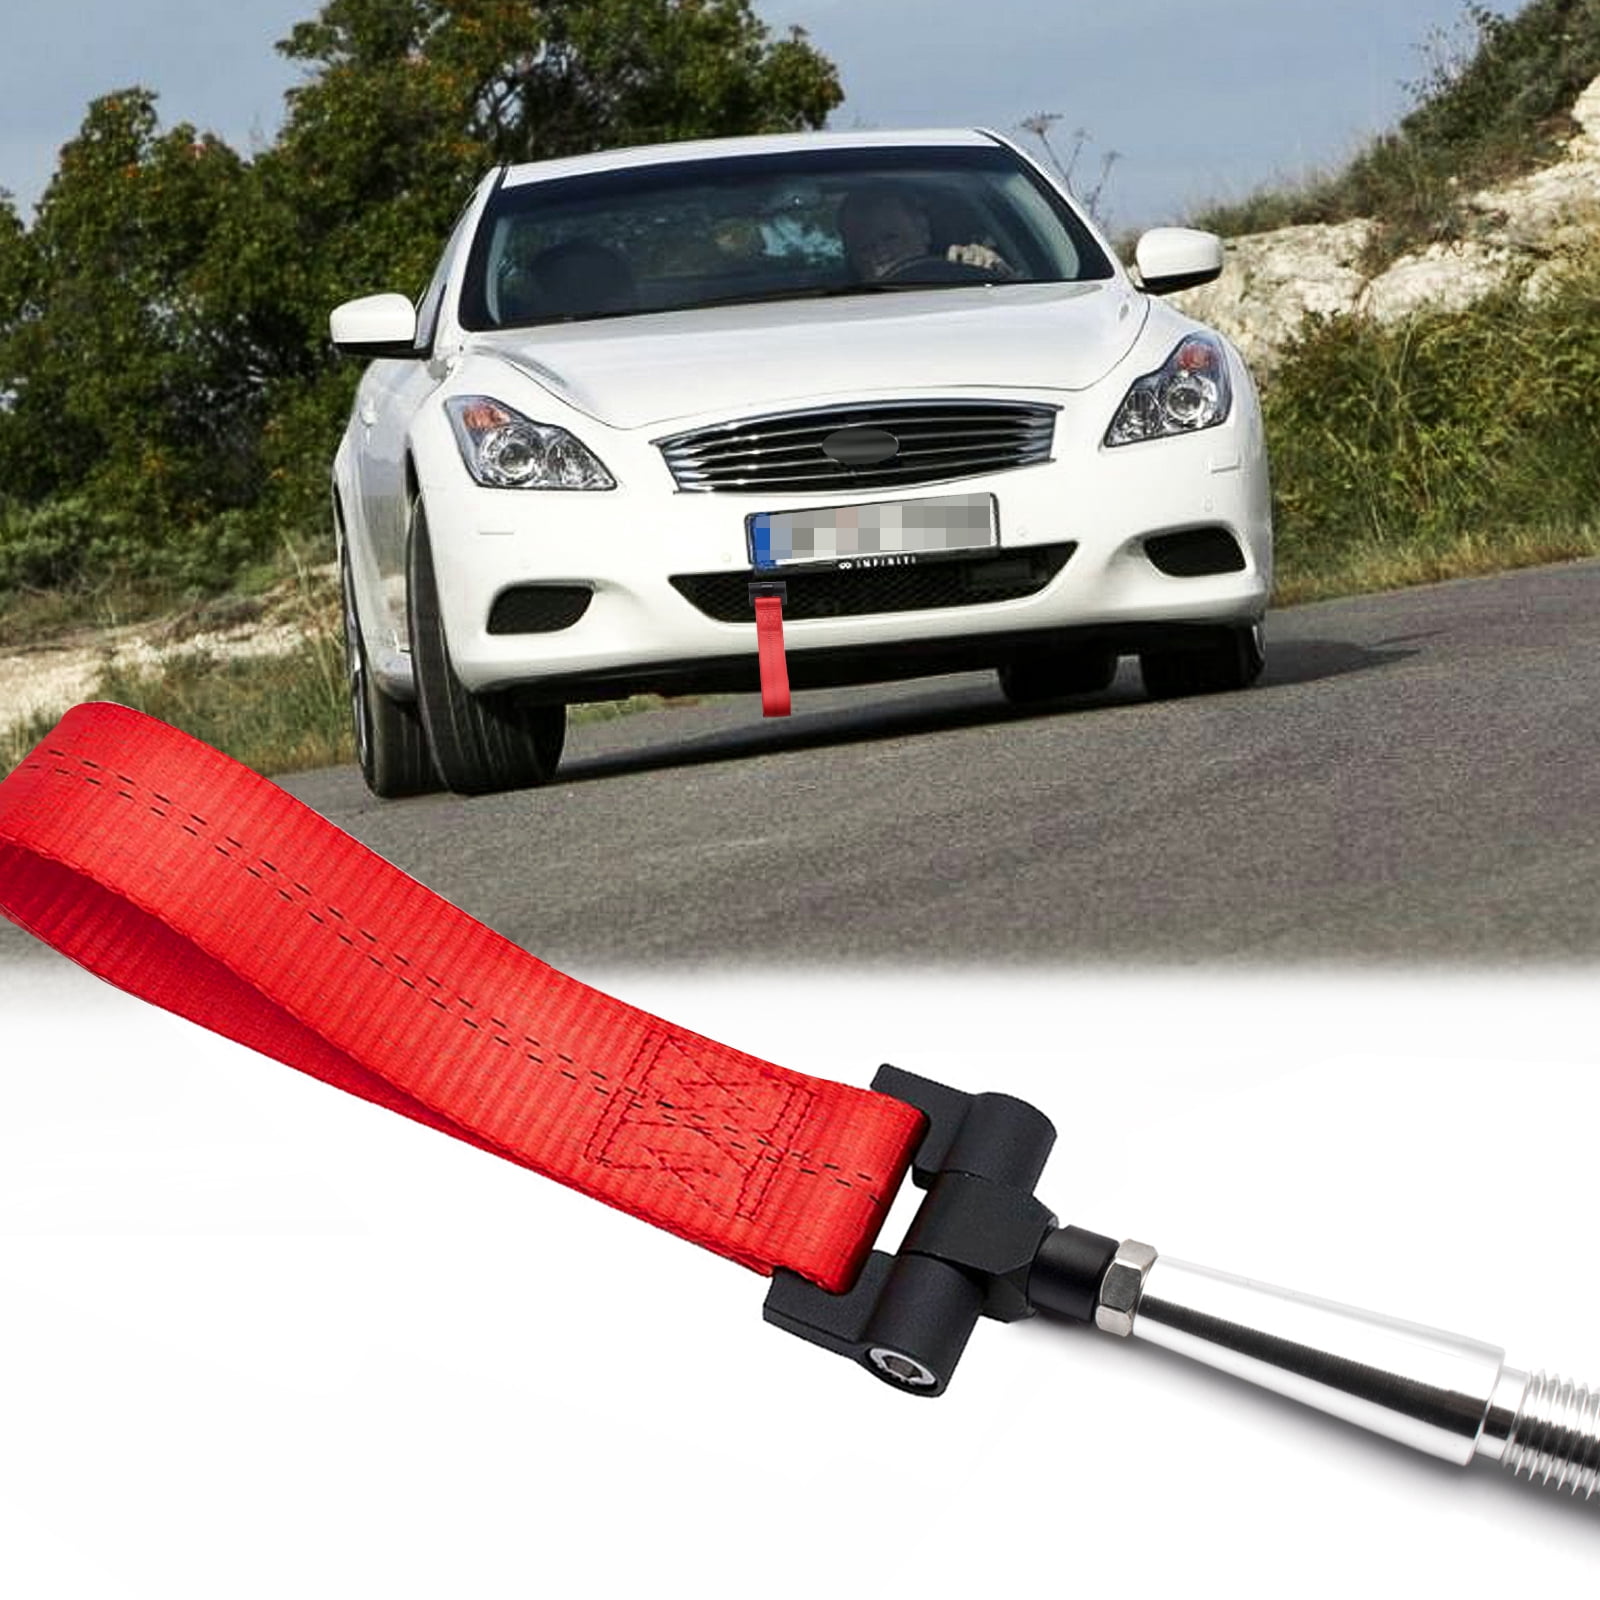 Xotic Tech Red JDM Style Tow Hole Adapter with Towing Strap for Nissan 370Z  GTR Juke/Fit Infiniti G37 Q60 QX70 FX35 